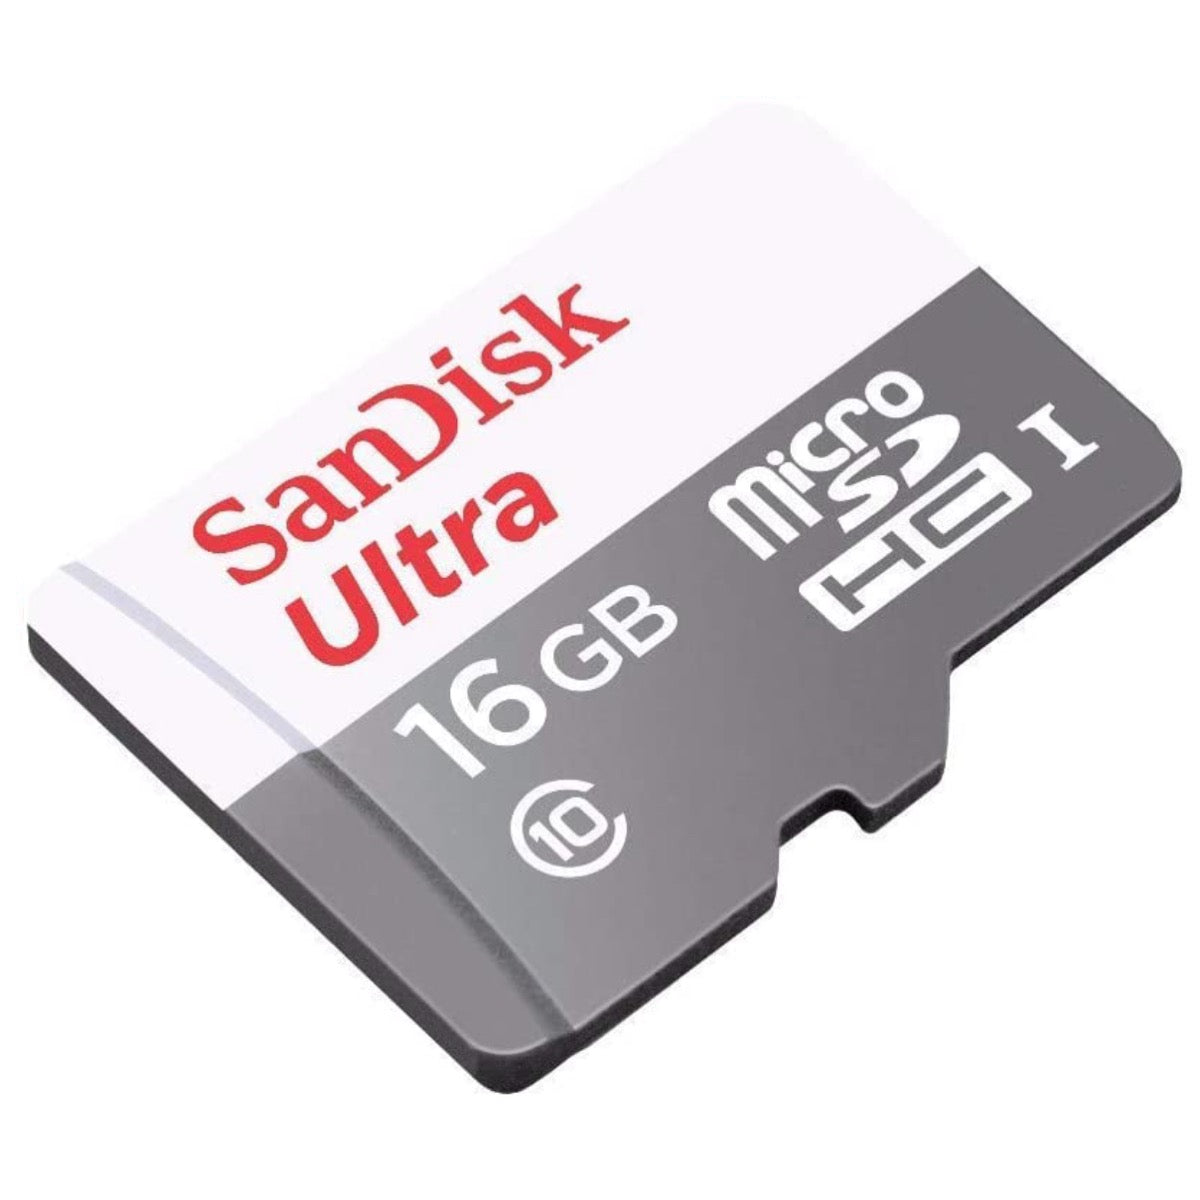 SanDisk Ultra 16GB Ultra Micro SDHC UHS-I/Class 10 Card with Adapter  (SDSQUNC-016G-GN6MA)